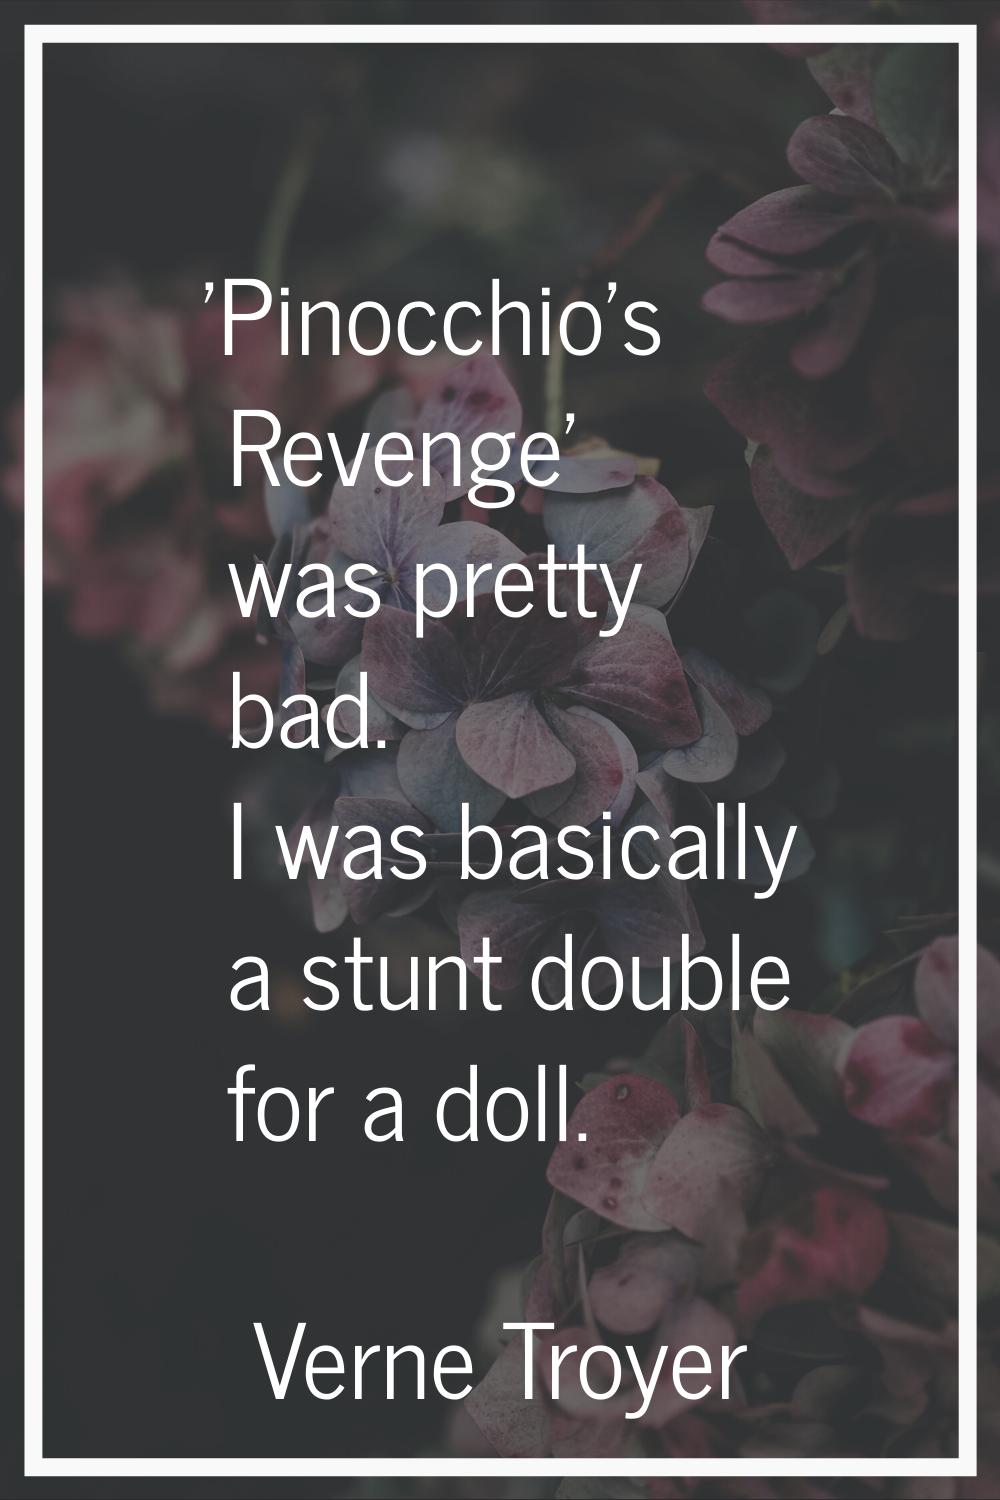 'Pinocchio's Revenge' was pretty bad. I was basically a stunt double for a doll.